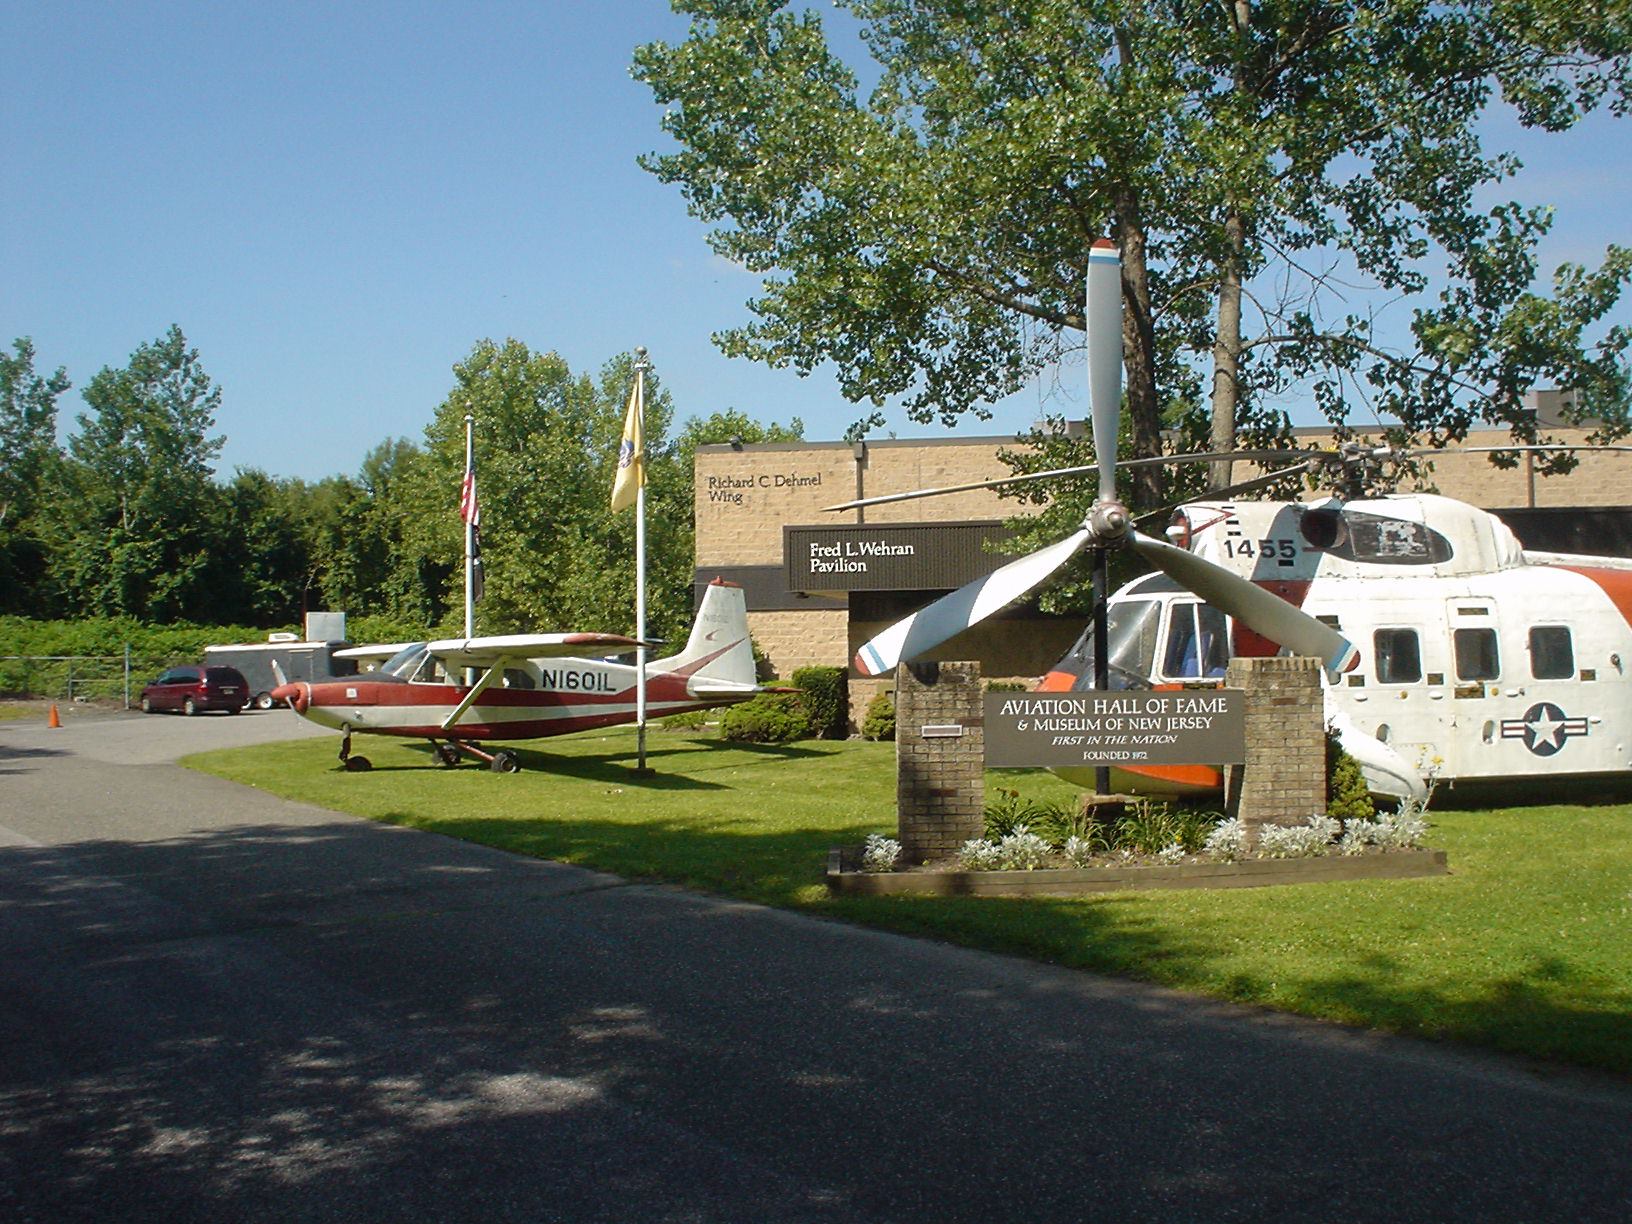 Aviation Hall of Fame and Museum